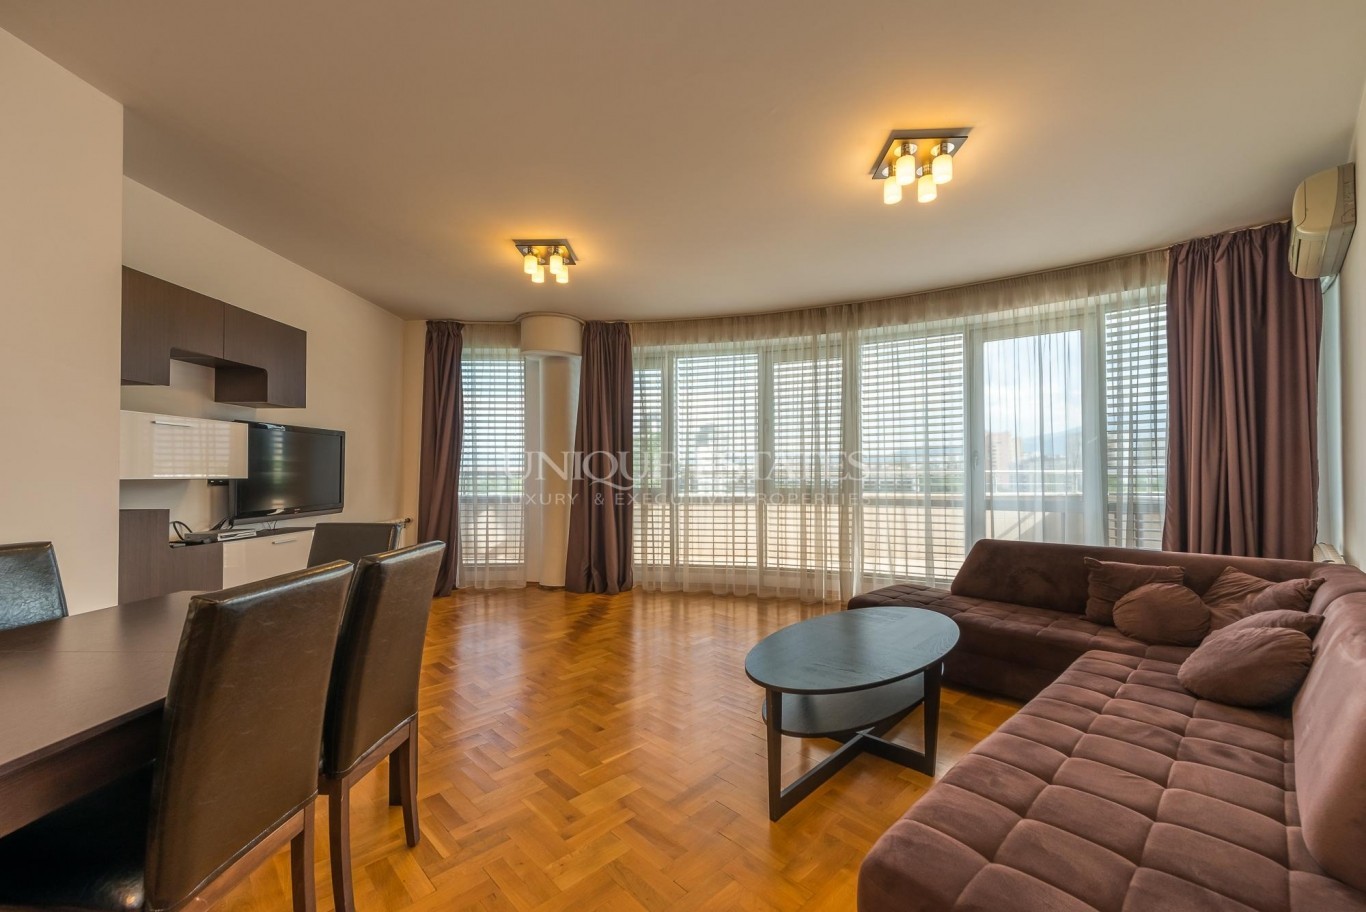 Apartment for sale in Sofia, Iztok with listing ID: K8155 - image 2